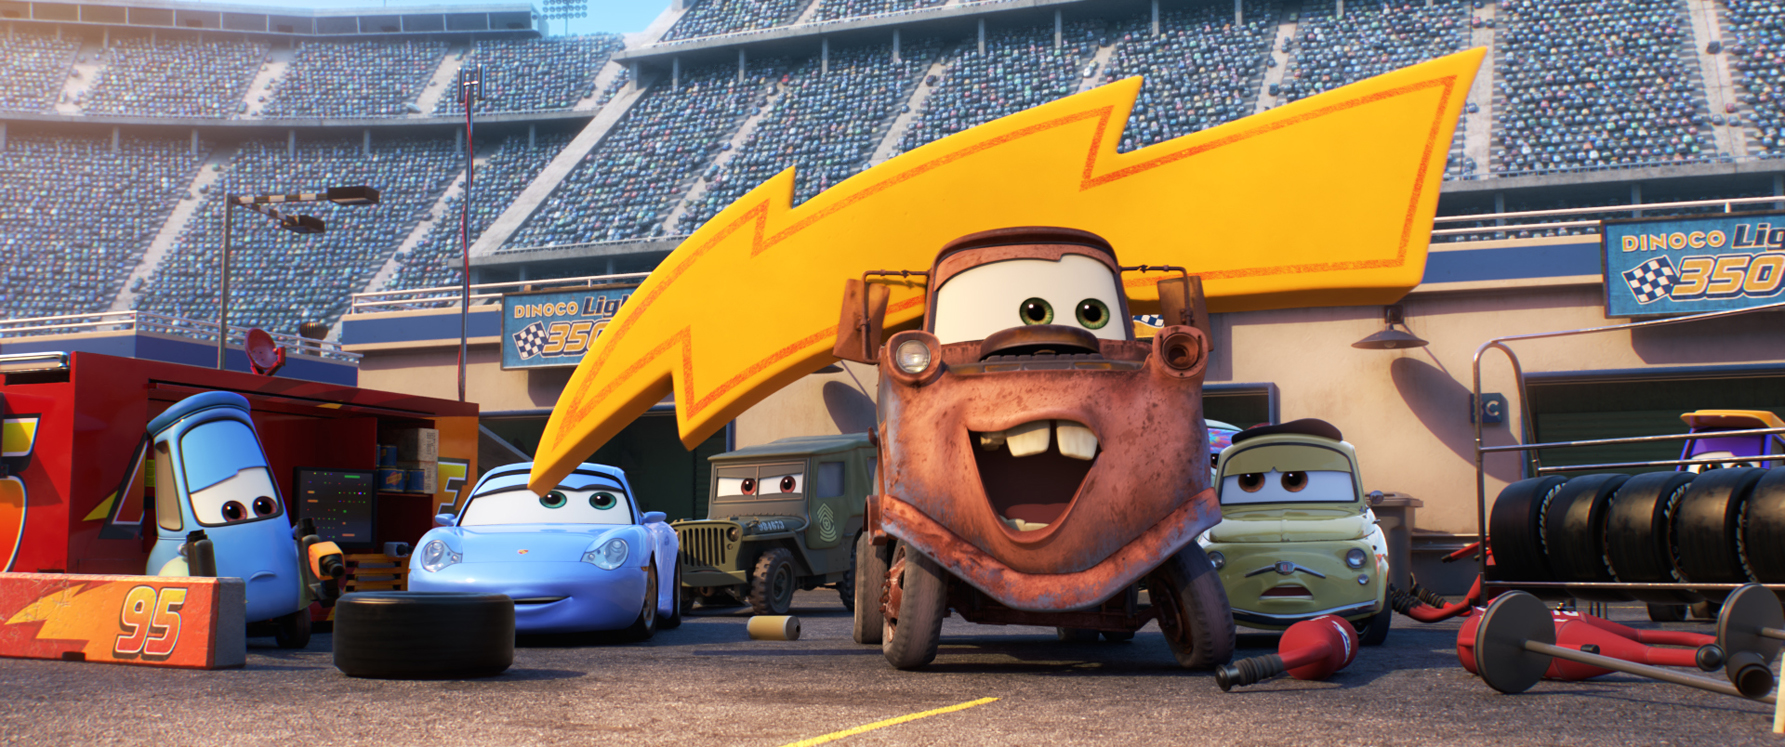 Lightning crashes (literally) in Disney and Pixar's Cars 3 trailer